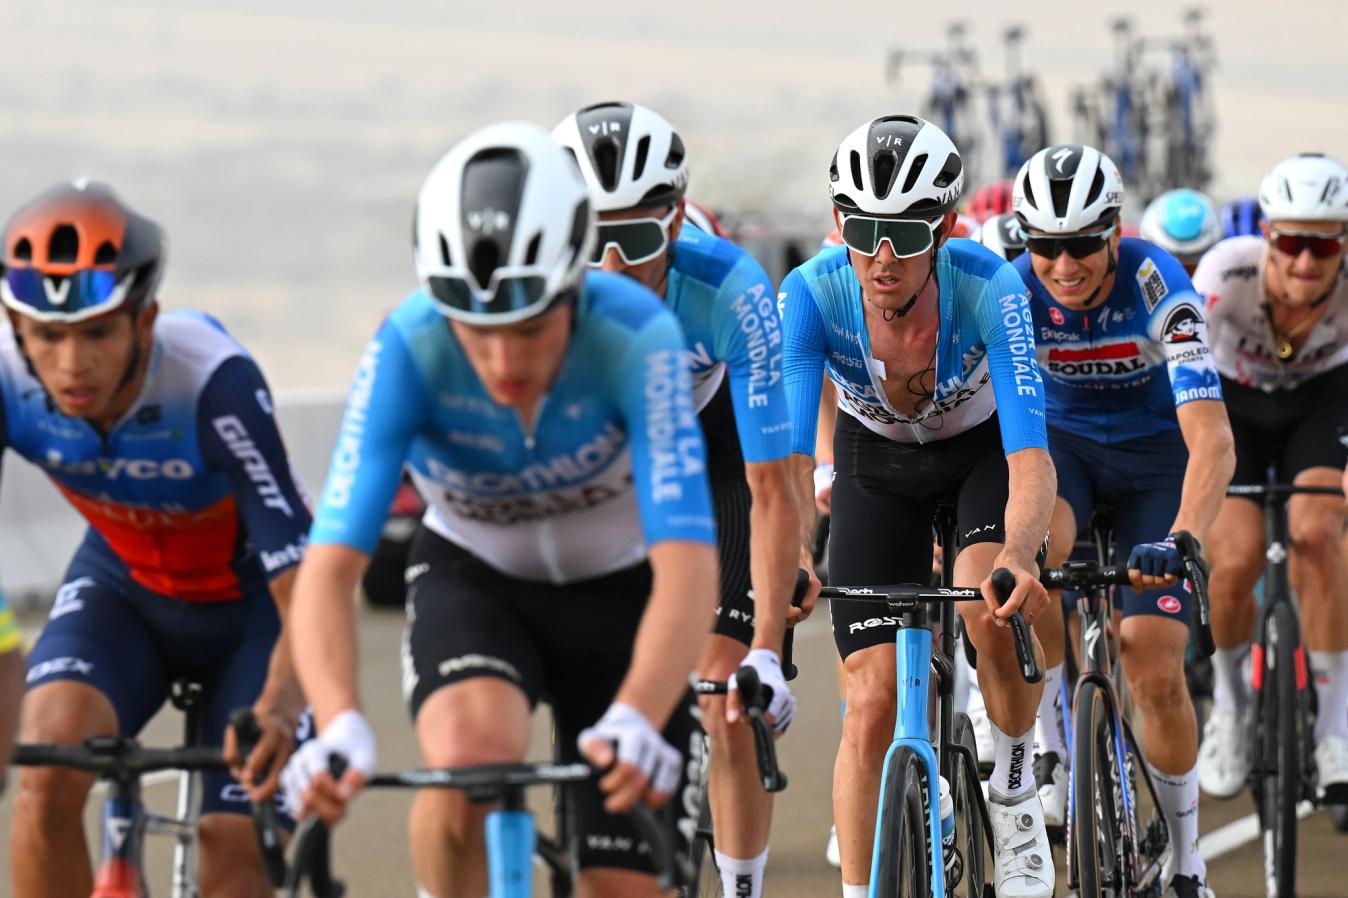 Ben O'Connor may not have won the UAE Tour, but Decathlon AG2R La Mondiale certainly made their presence known